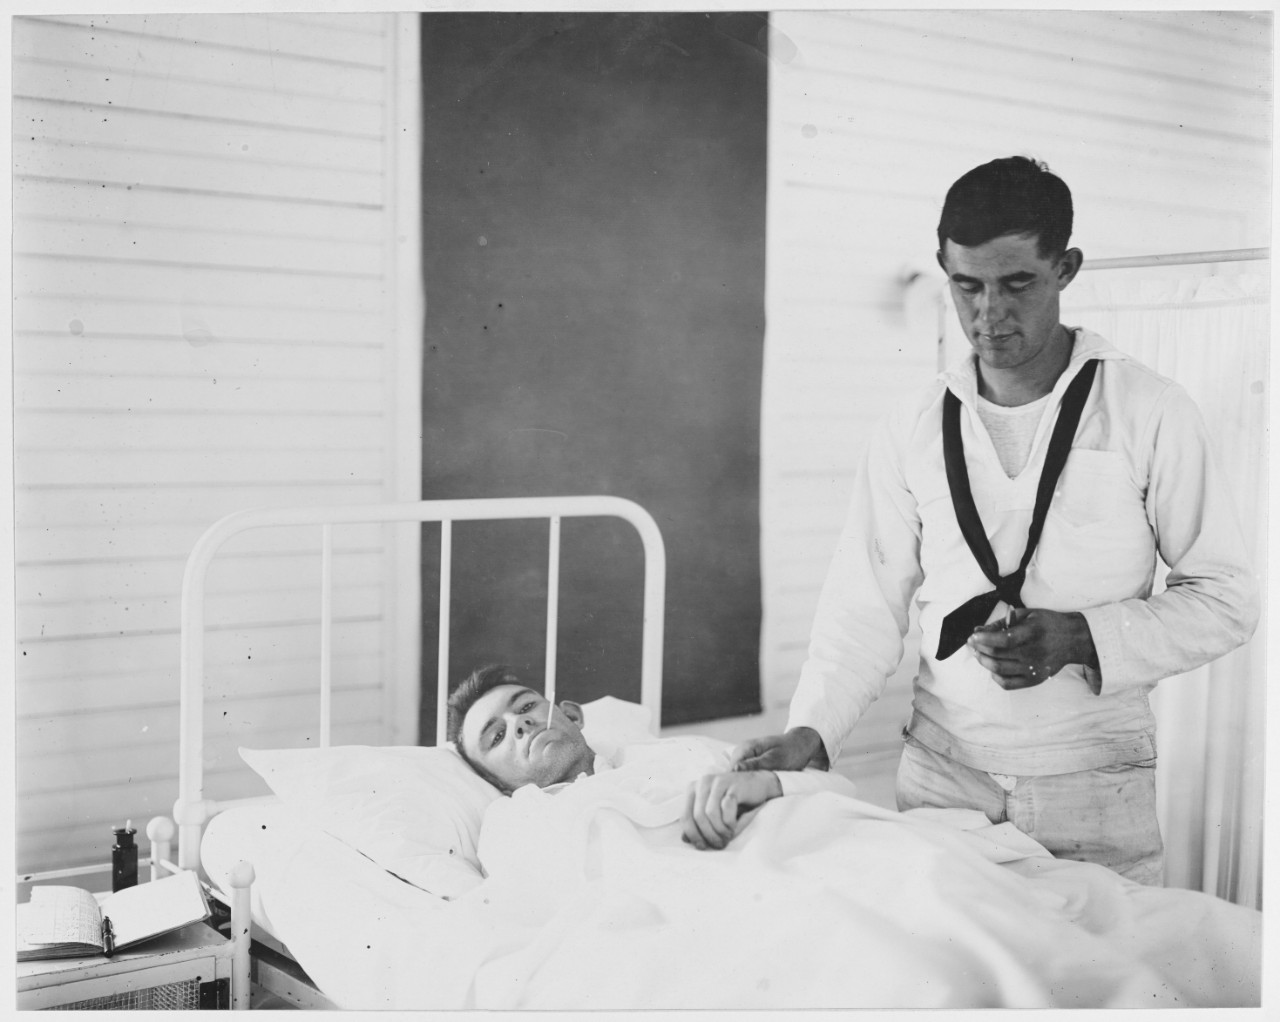 Taking pulse and temperature of patient. U.S. Naval Hospital, New Orleans, Louisiana.